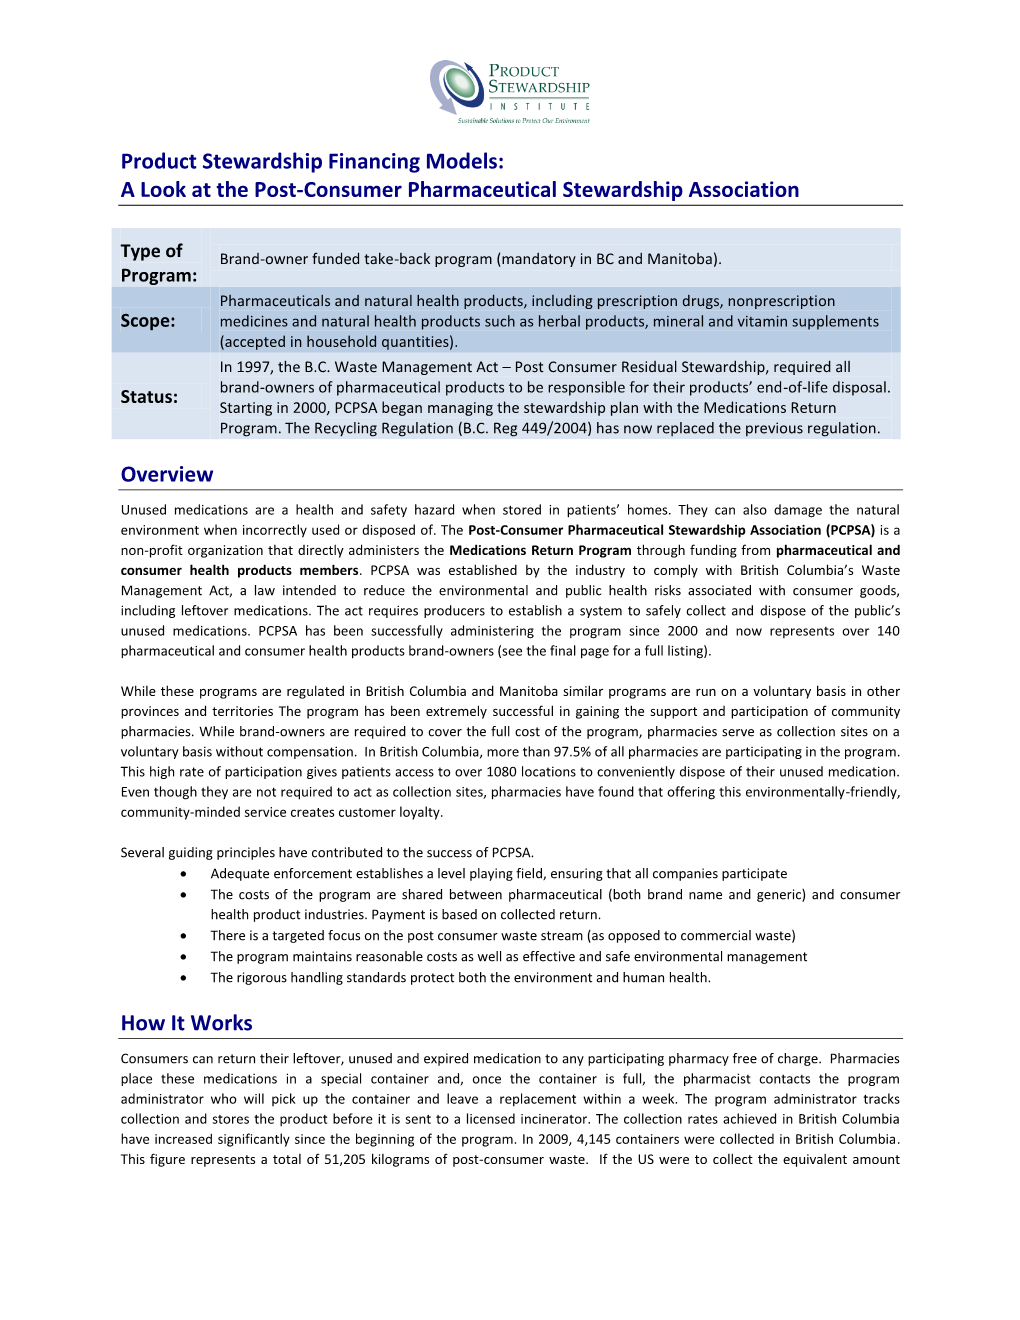 Product Stewardship Financing Models: a Look at the Post-Consumer Pharmaceutical Stewardship Association